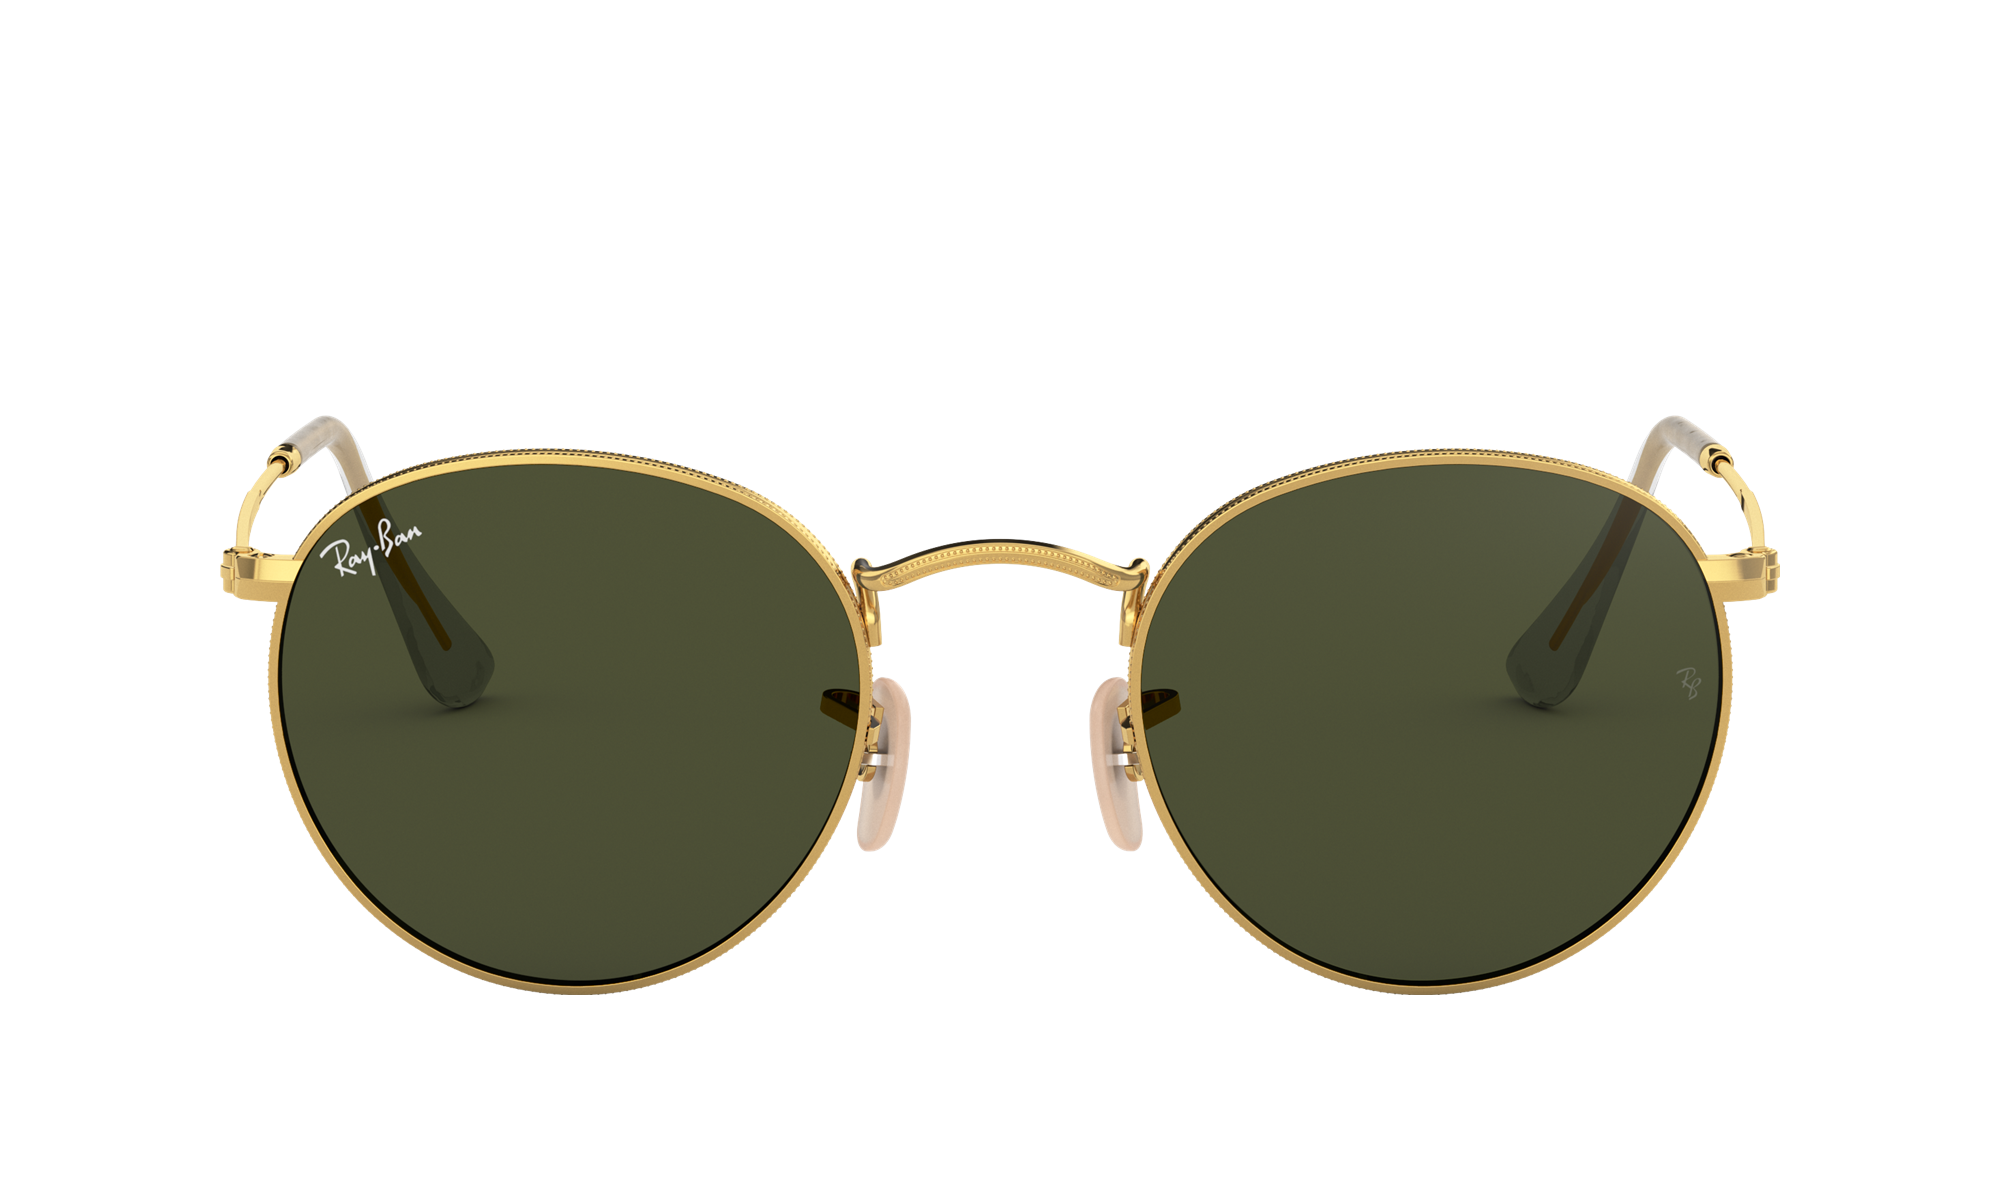 Ray Ban Round Metal Sunglasses 0rb3447-gold | ModeSens | Round metal  sunglasses, Metal sunglasses, Ray ban round metal